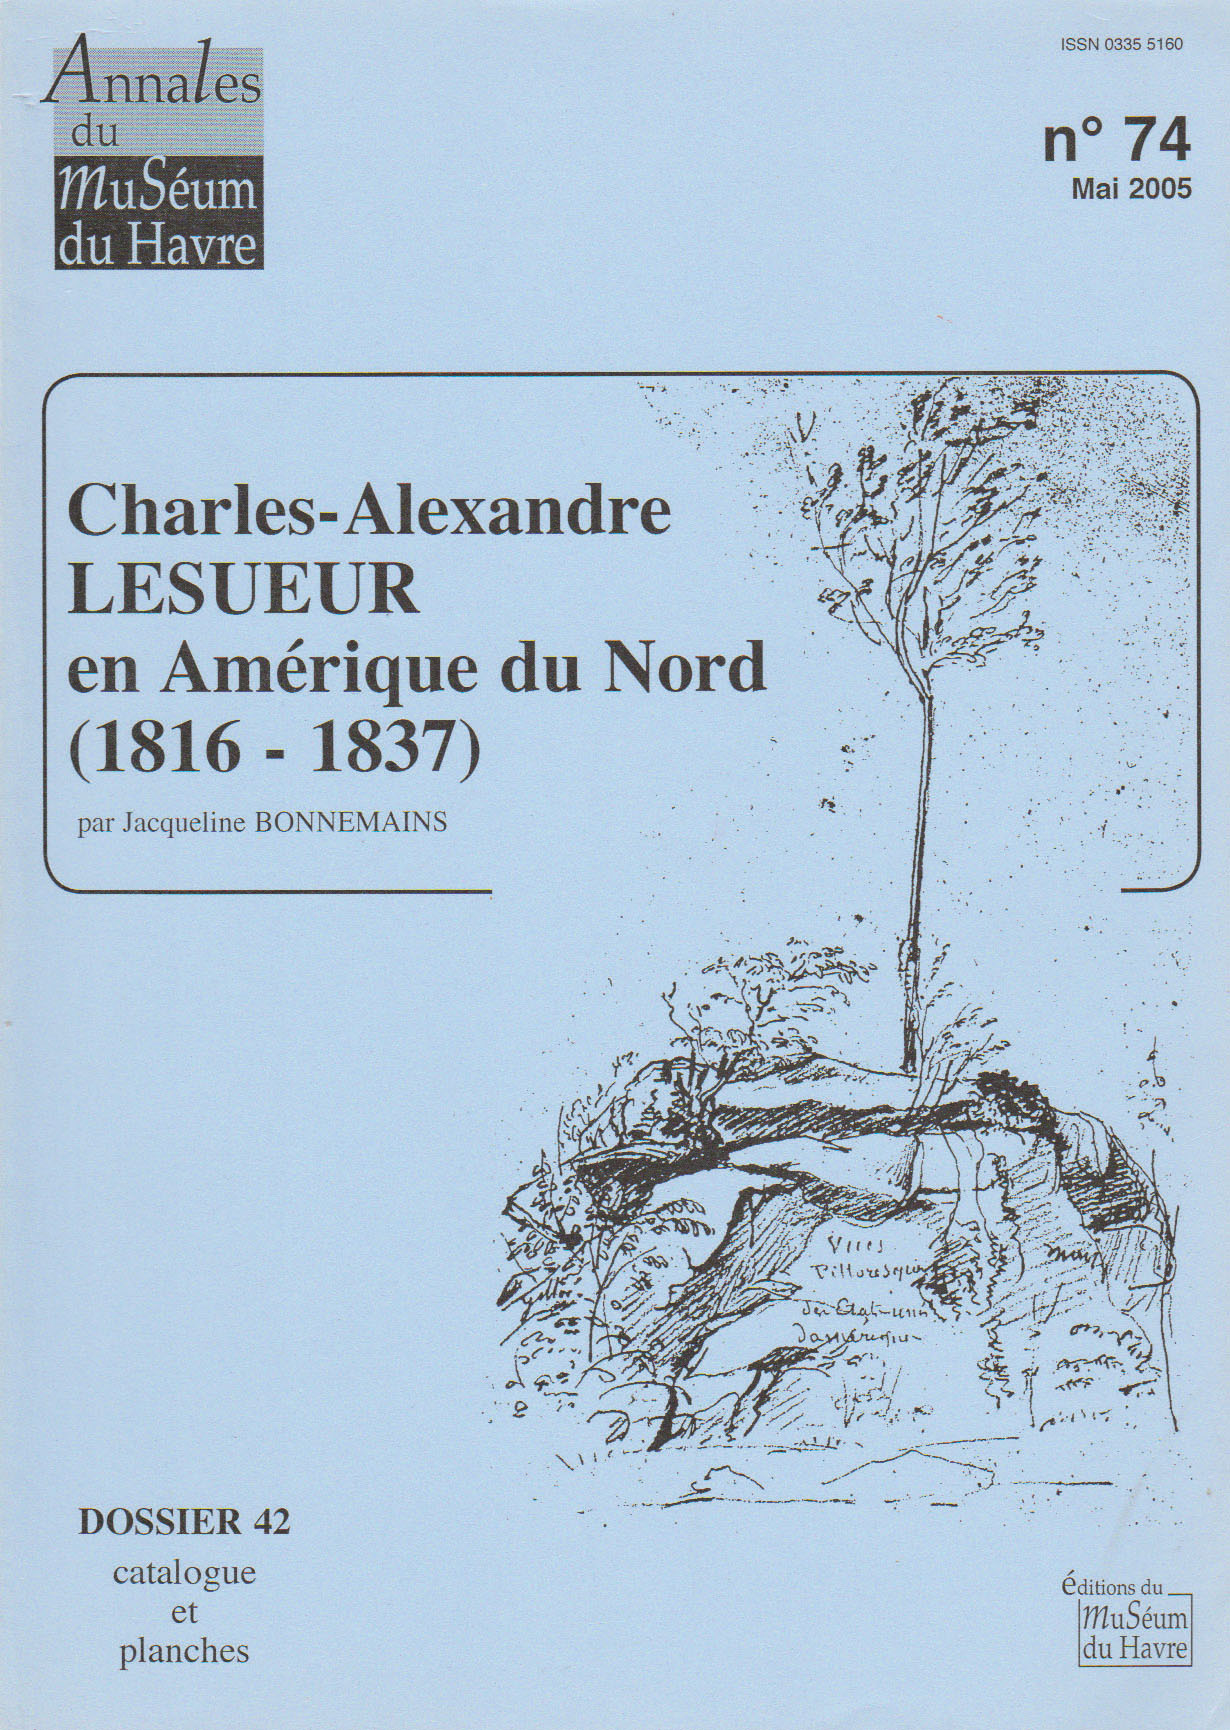 Cover of catalogue 42, Lesueur in North America, by Jacqueline Bonnemains